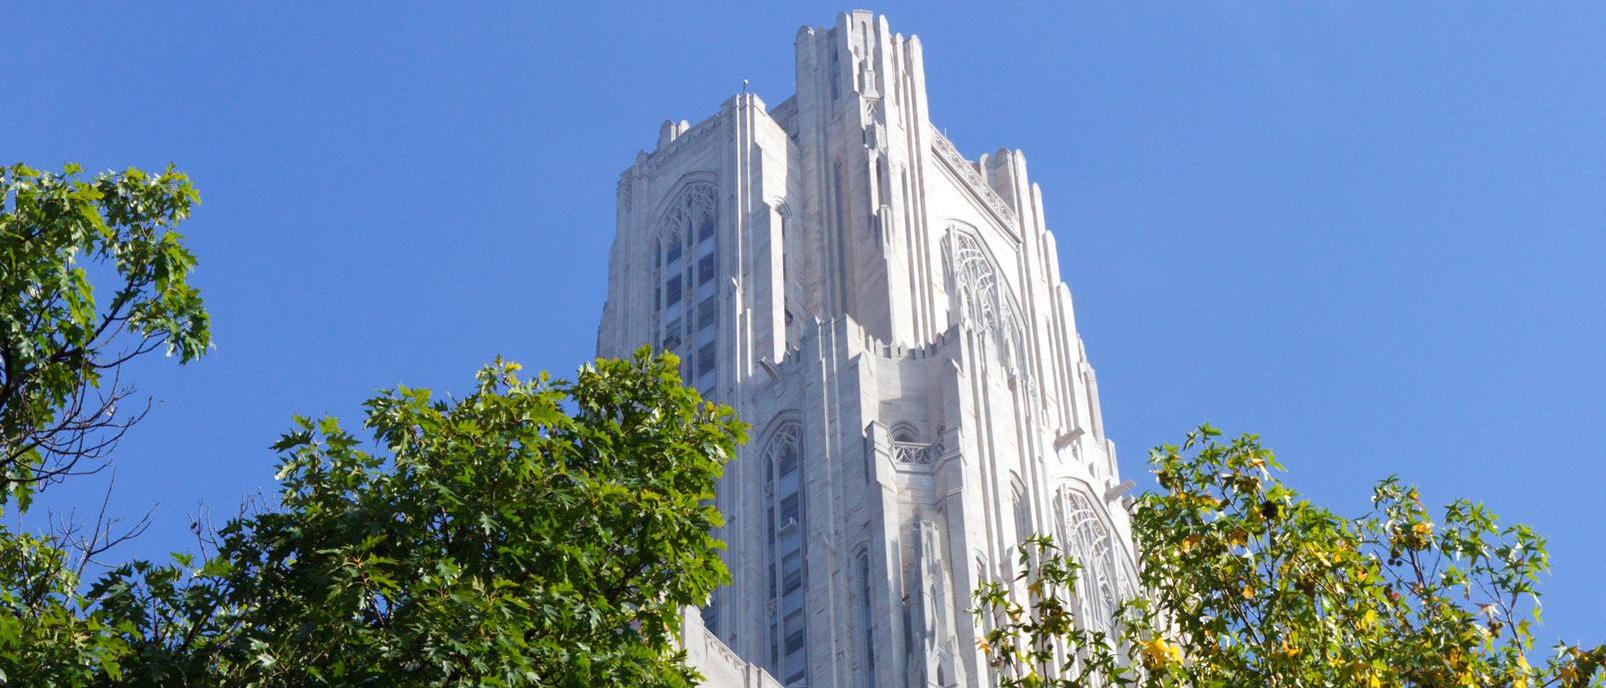 Image of the cathedral of learning